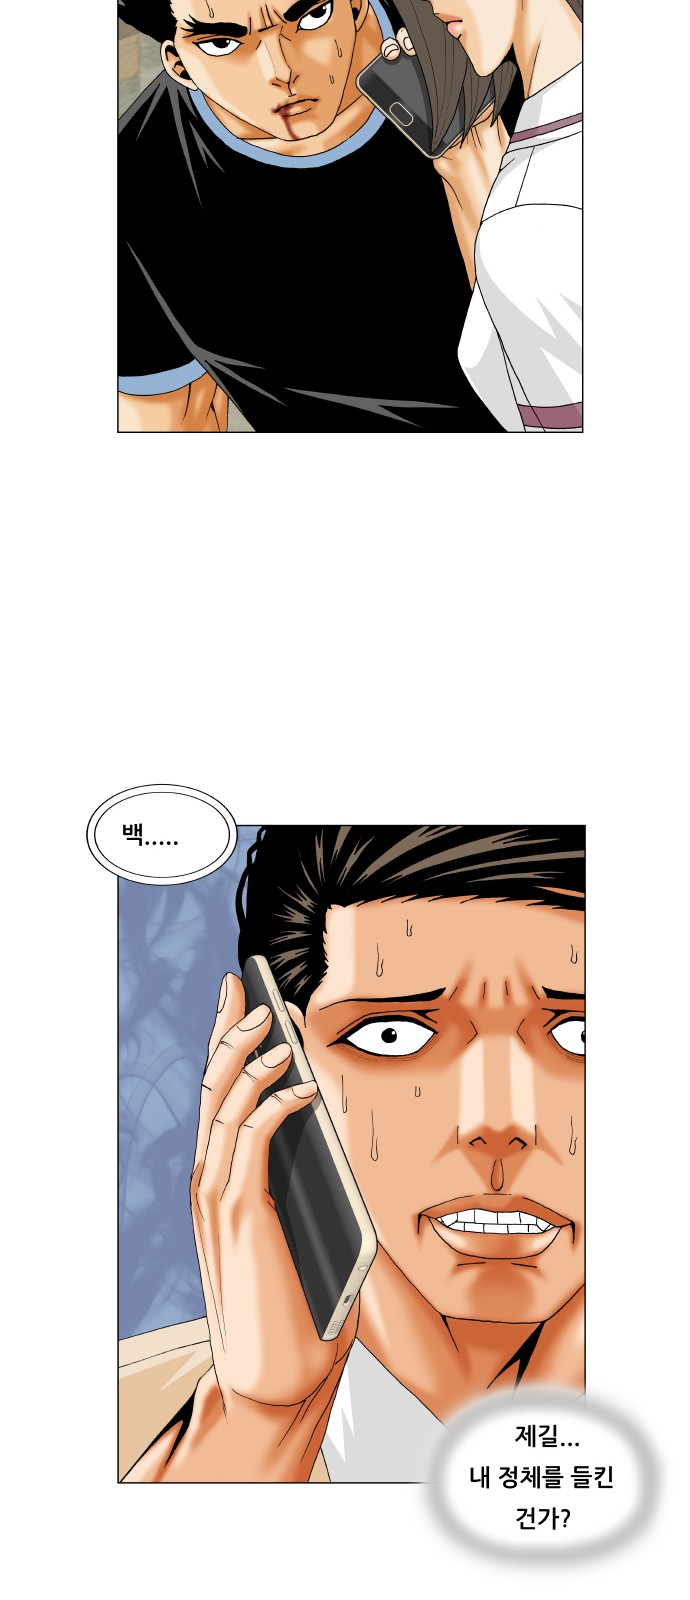 Ultimate Legend - Kang Hae Hyo - Chapter 242 - Page 3